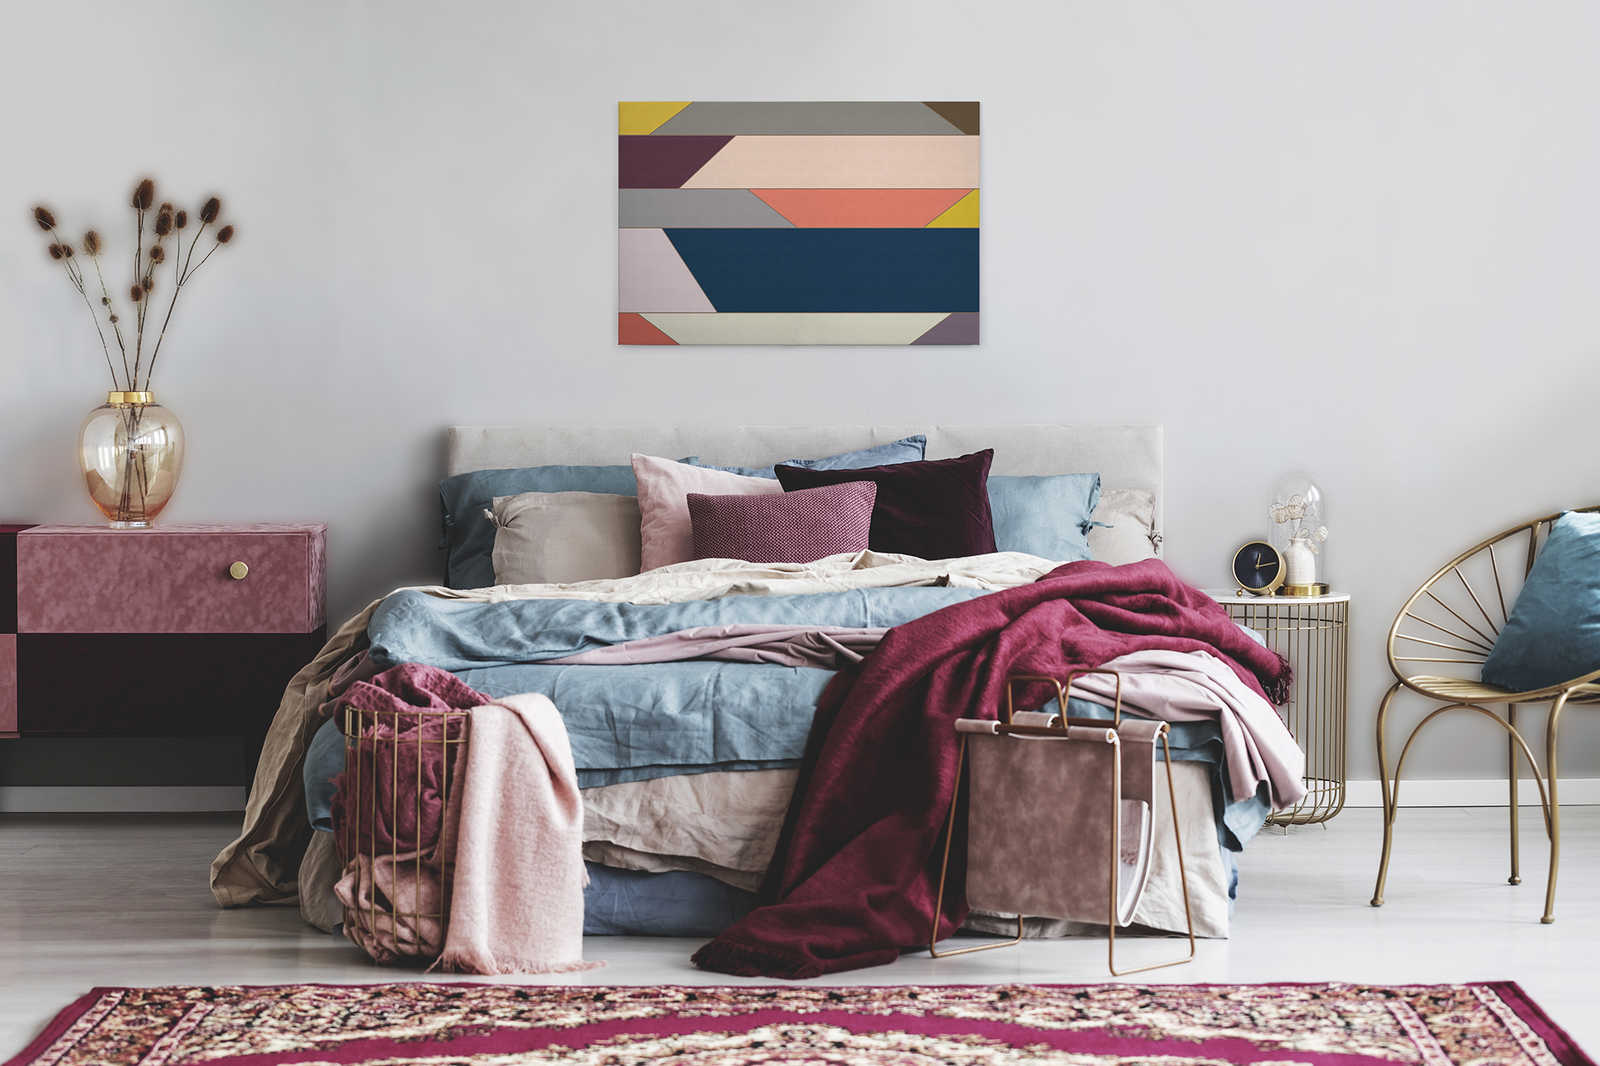             Geometry 1 - Canvas painting with colourful horizontal stripe pattern- ribbed structure - 0.90 m x 0.60 m
        